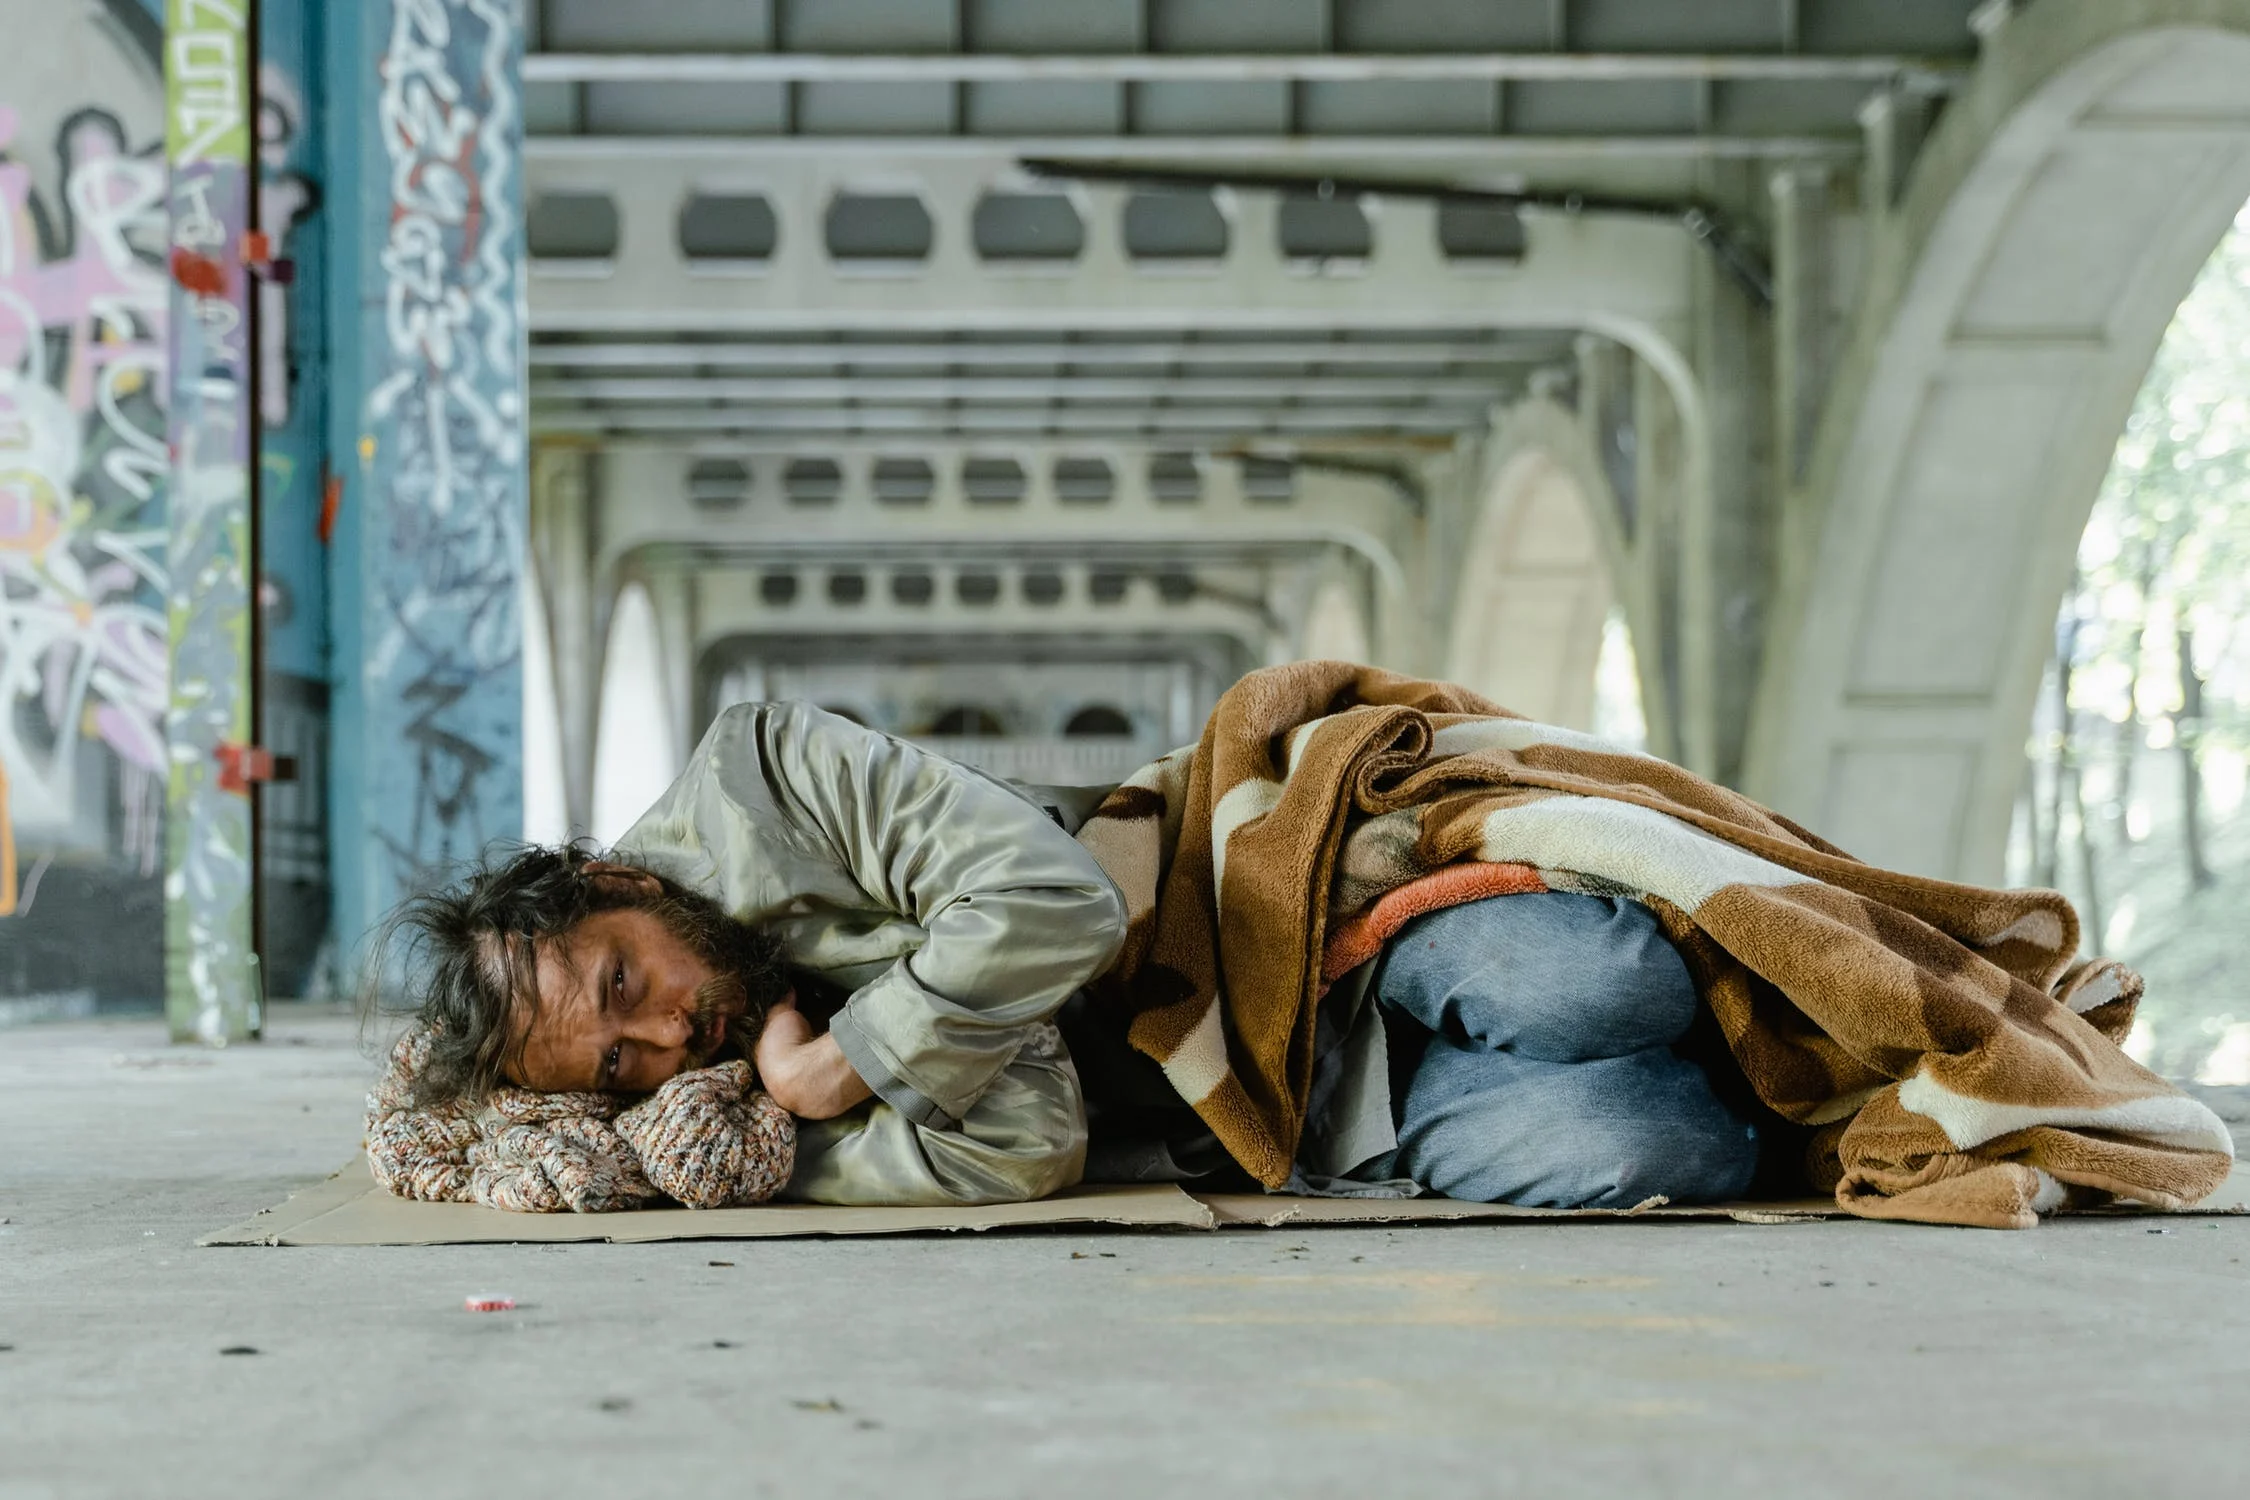 The exorbitant costs of being homeless in America